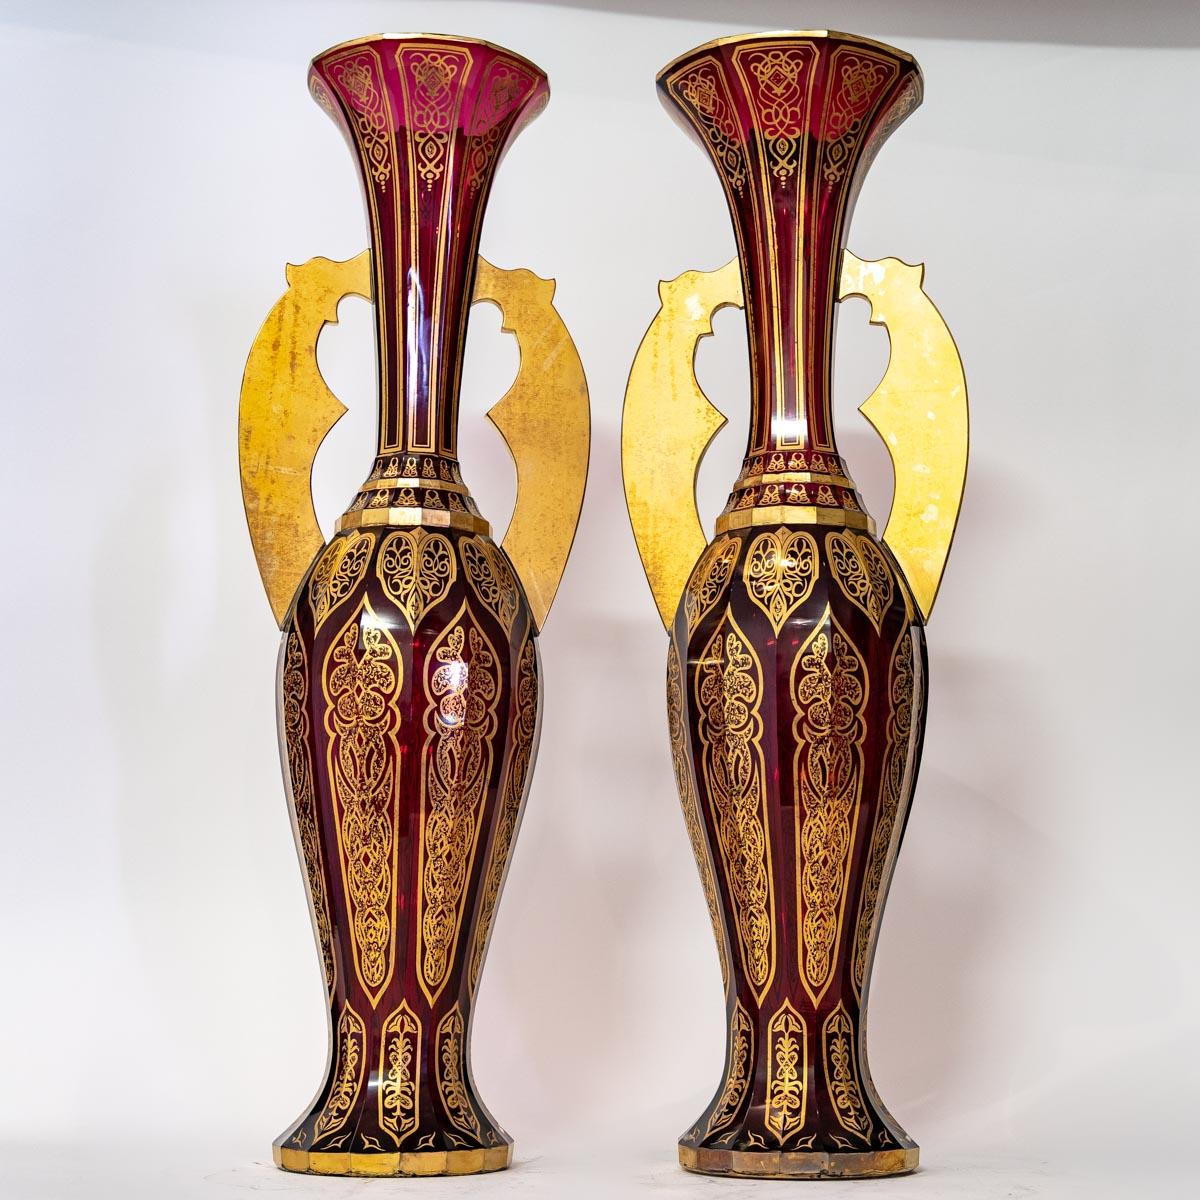 Pair of Bohemian Cut Crystal Vases in Ruby Red and Gold, 19th Century For Sale 1